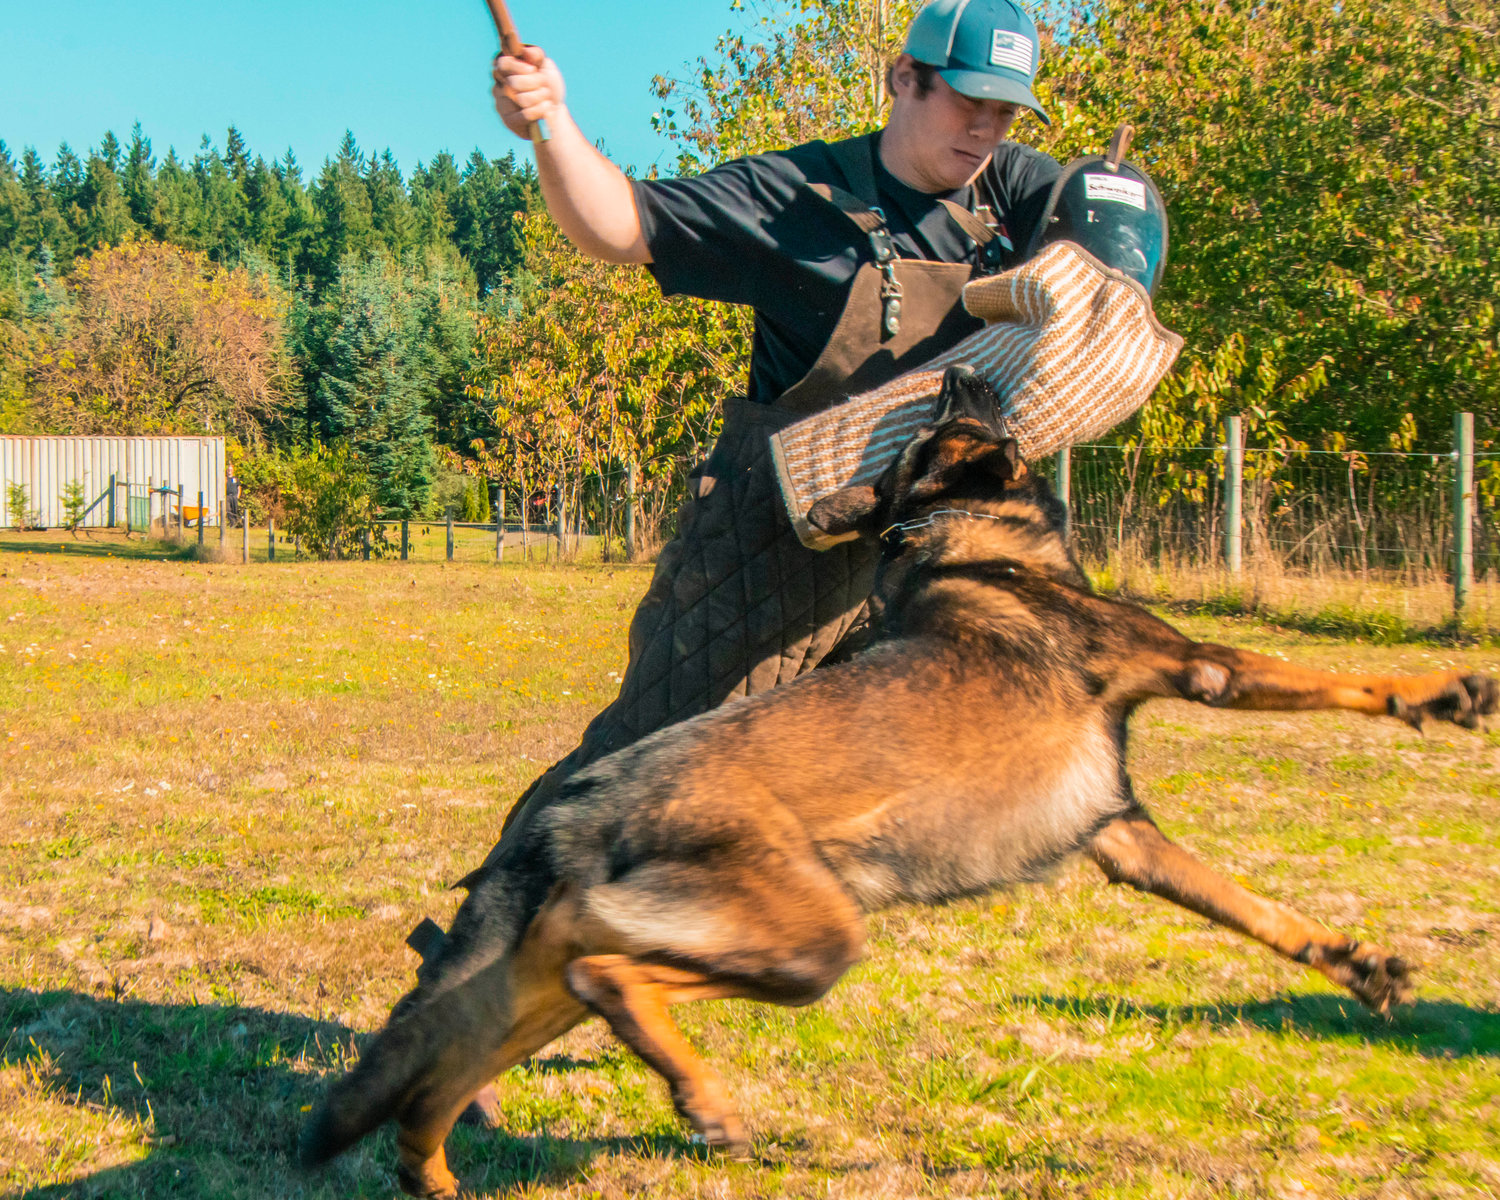 Max takes the training arm right off Dakota Deal throwing him to the ground Tuesday afternoon at Kraftwerk K9 German Shepherds in Rochester.